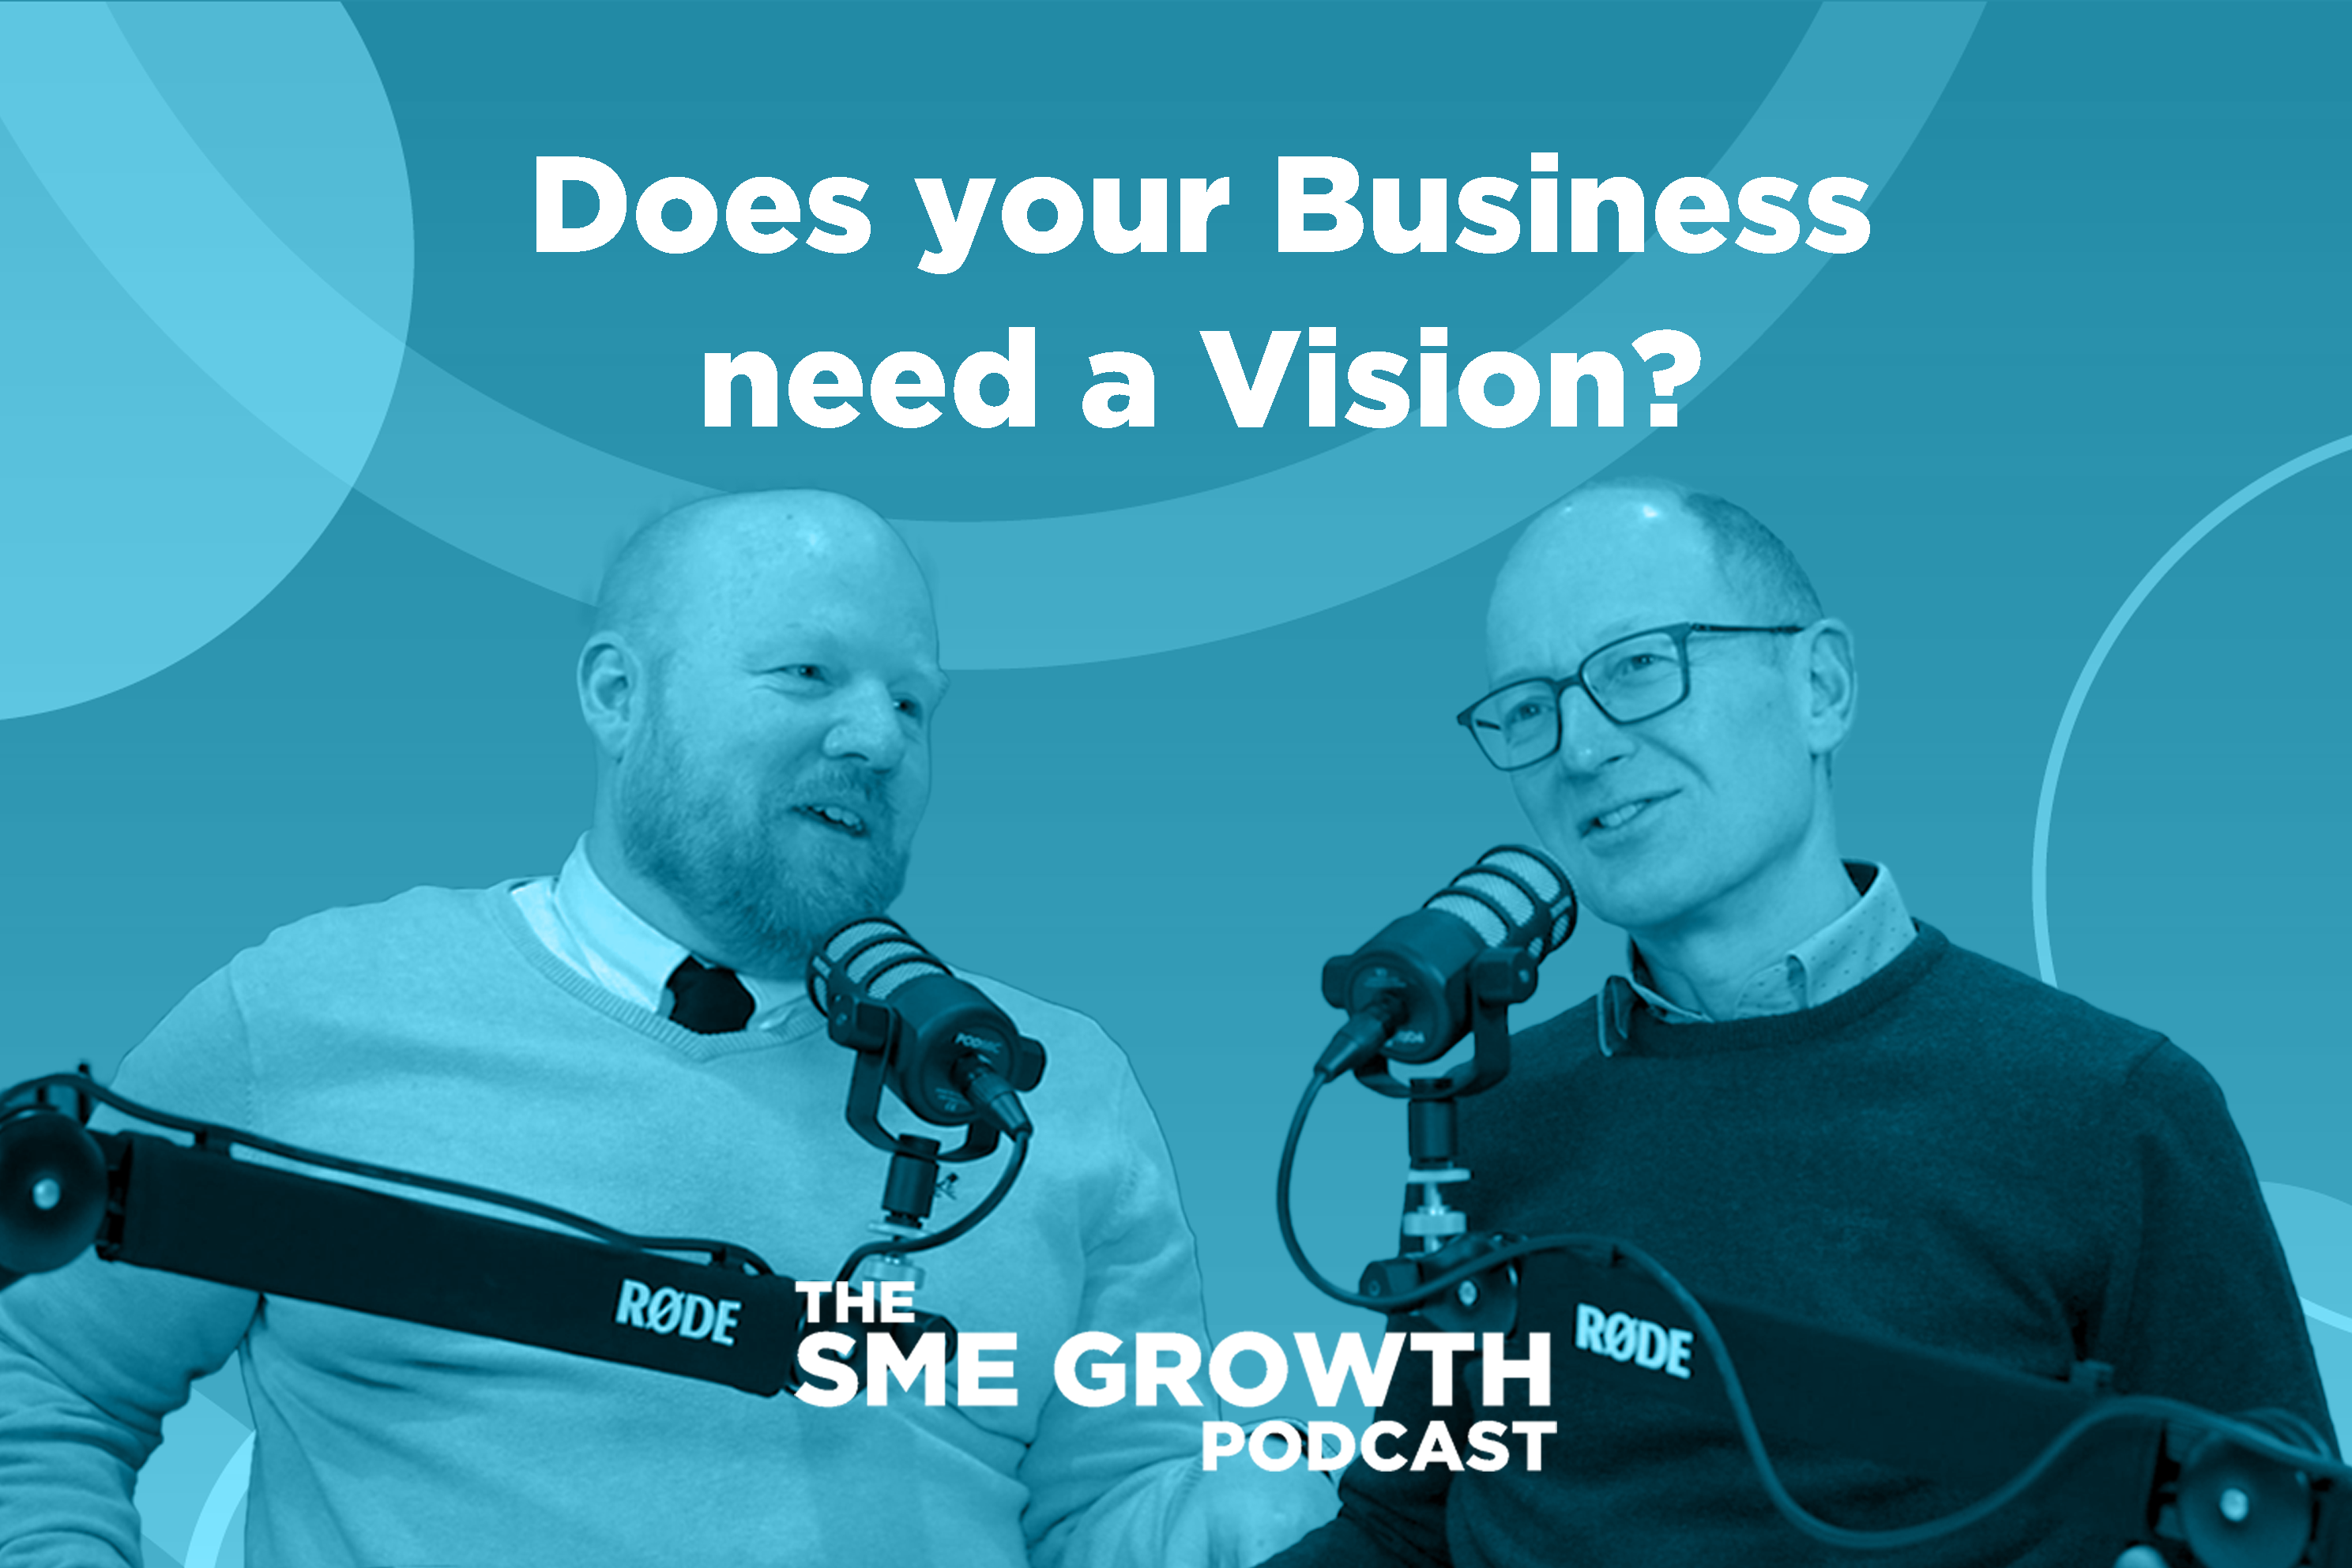 Does your business need a vision, The SME Growth Podcast, Two males sitting in front of microphones coloured blue with blue background